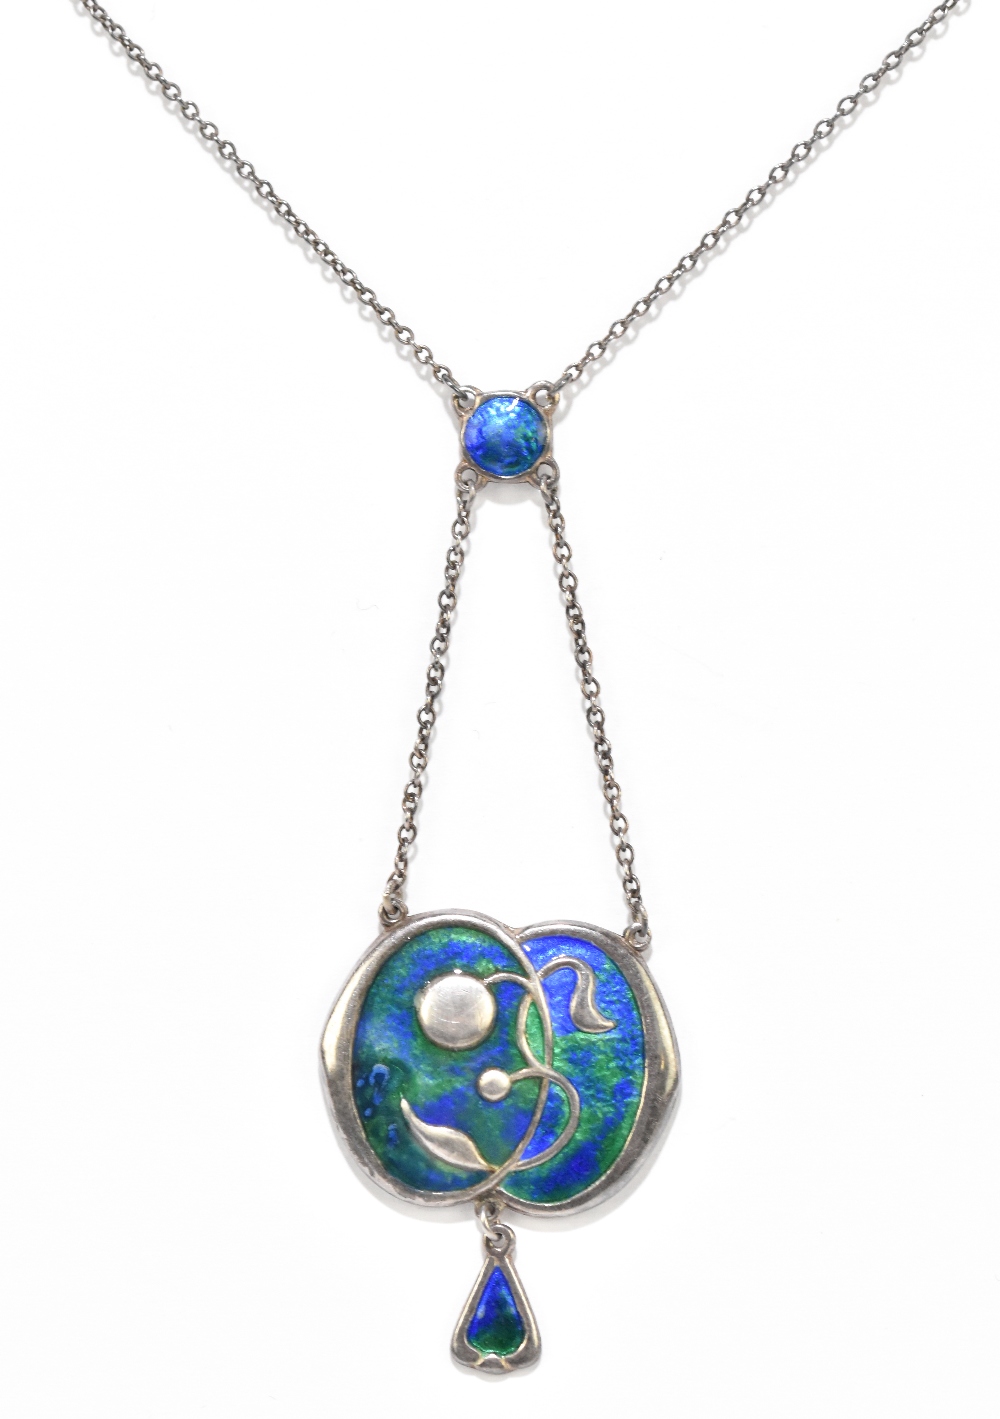 CHARLES HORNER; a George V hallmarked silver and blue/green enamel decorated Art Nouveau necklace,